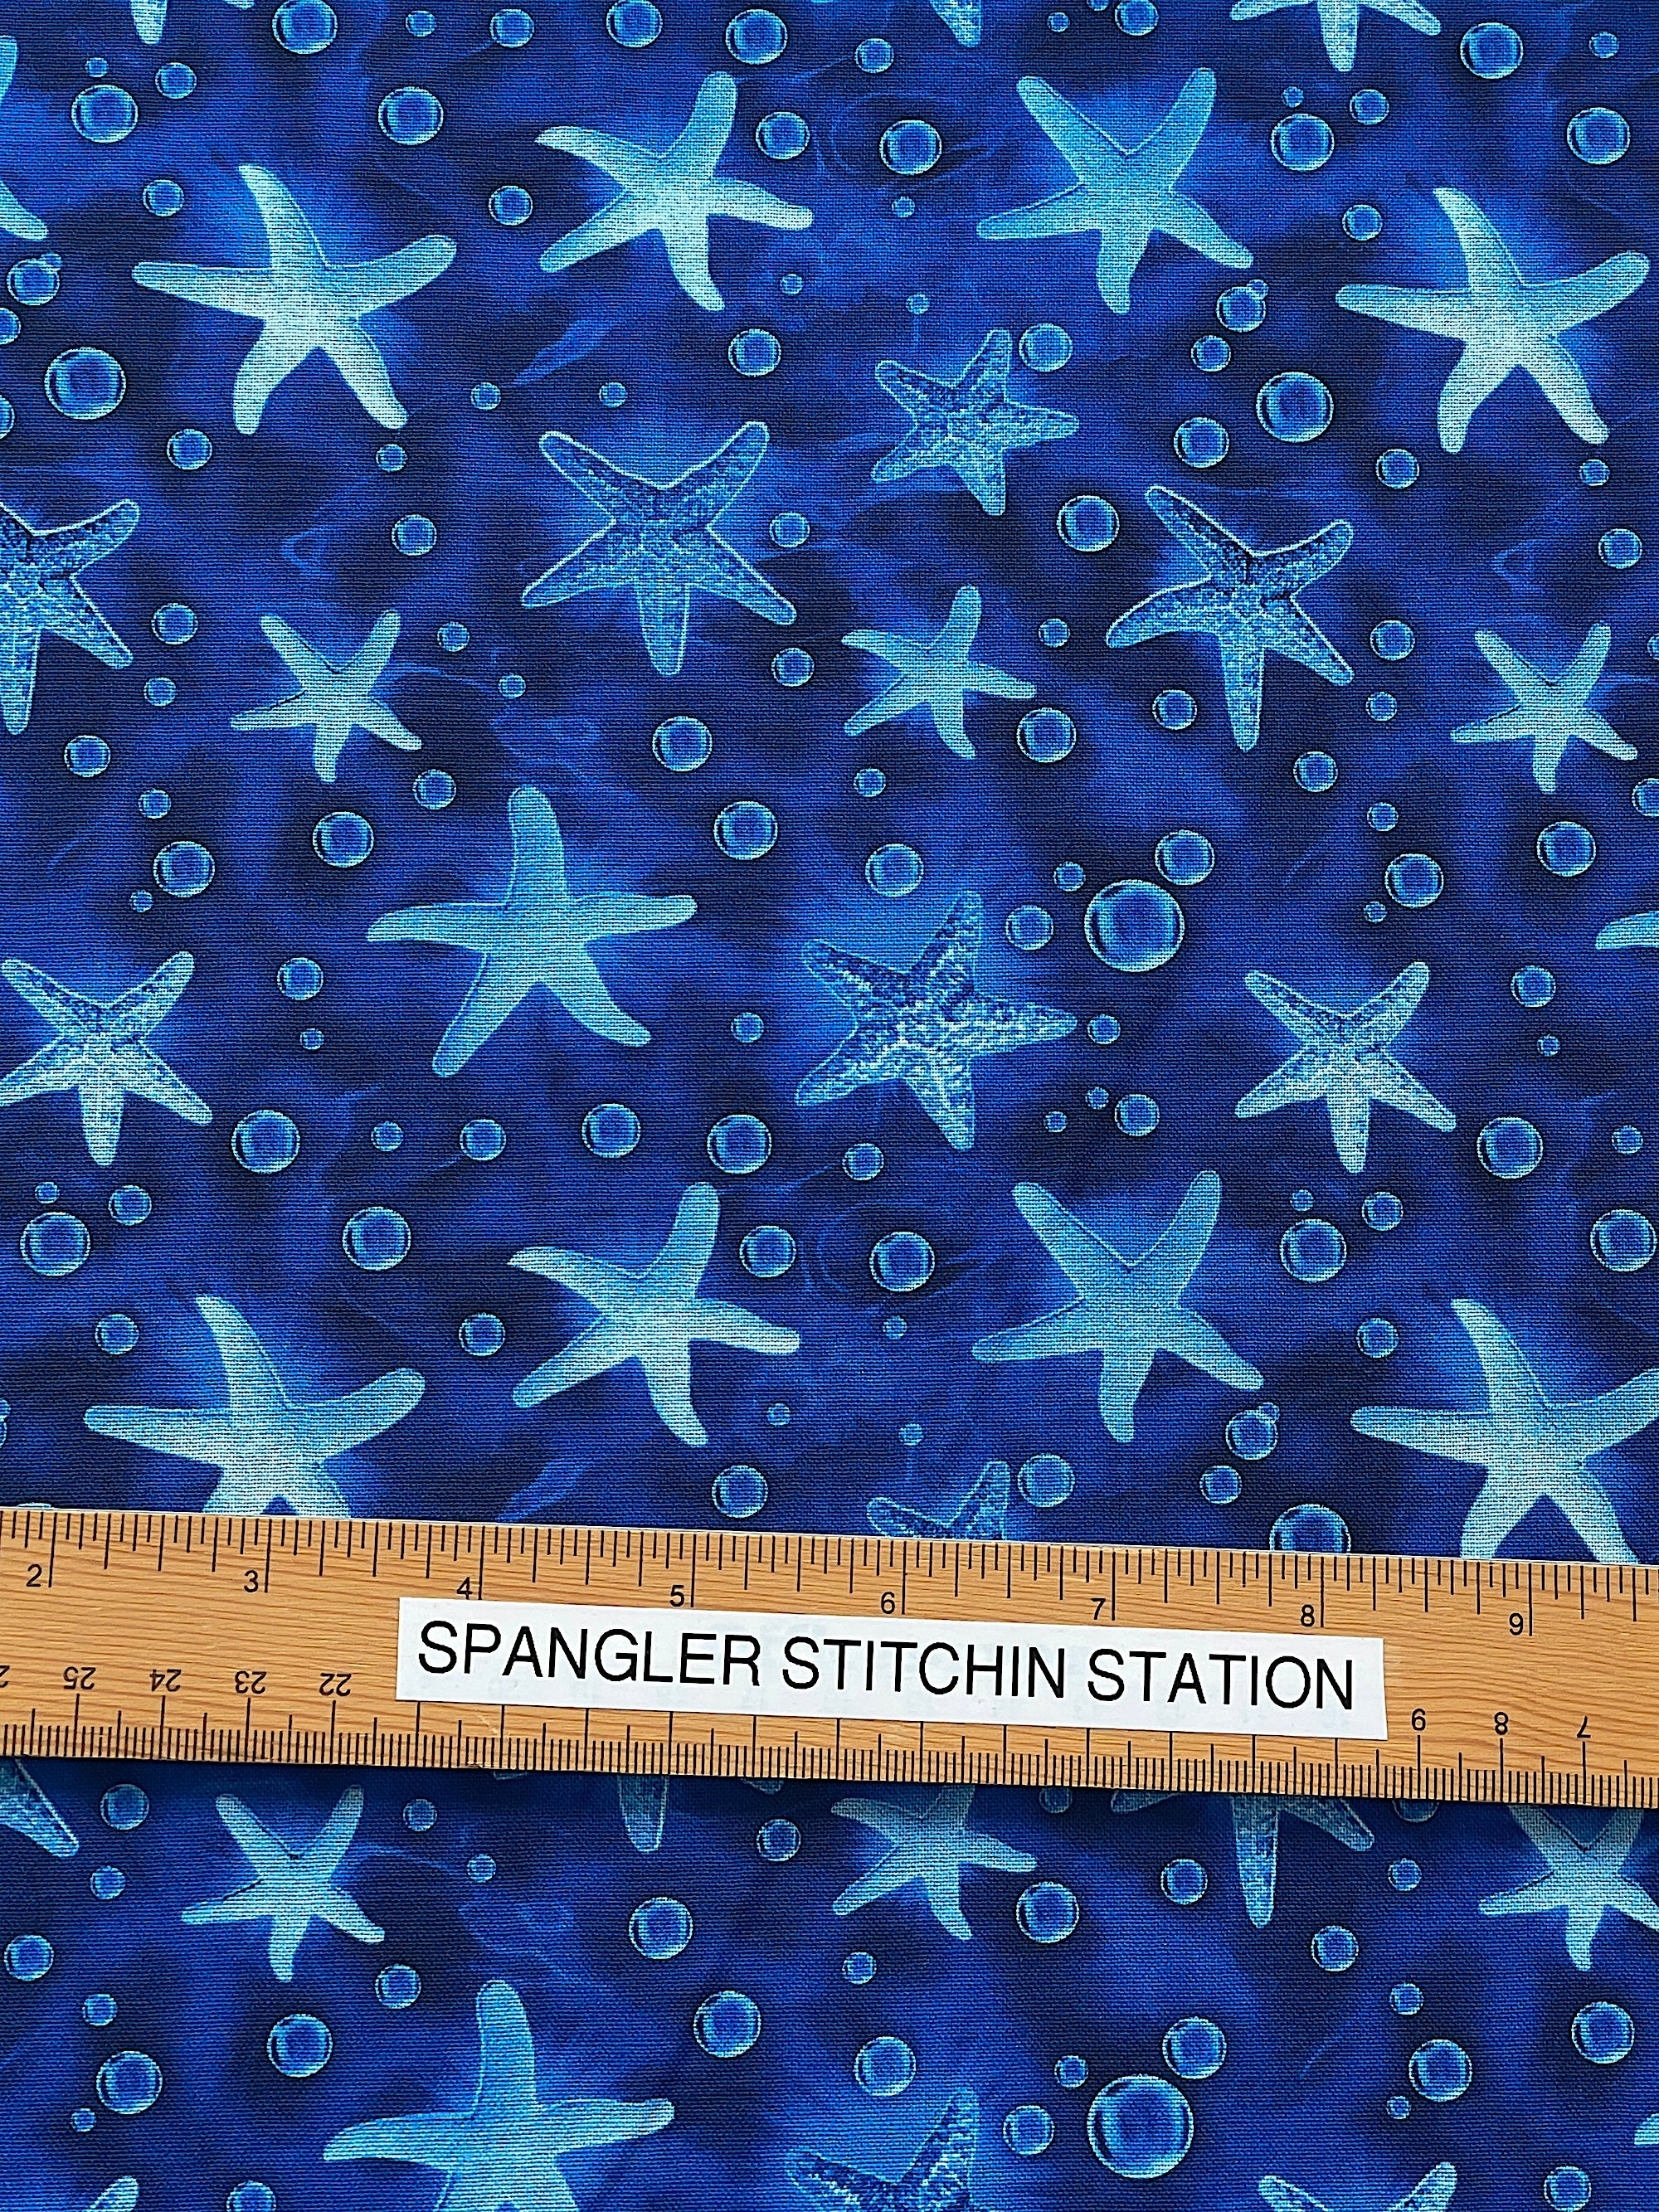 Ruler on fabric to show the size of the starfish.